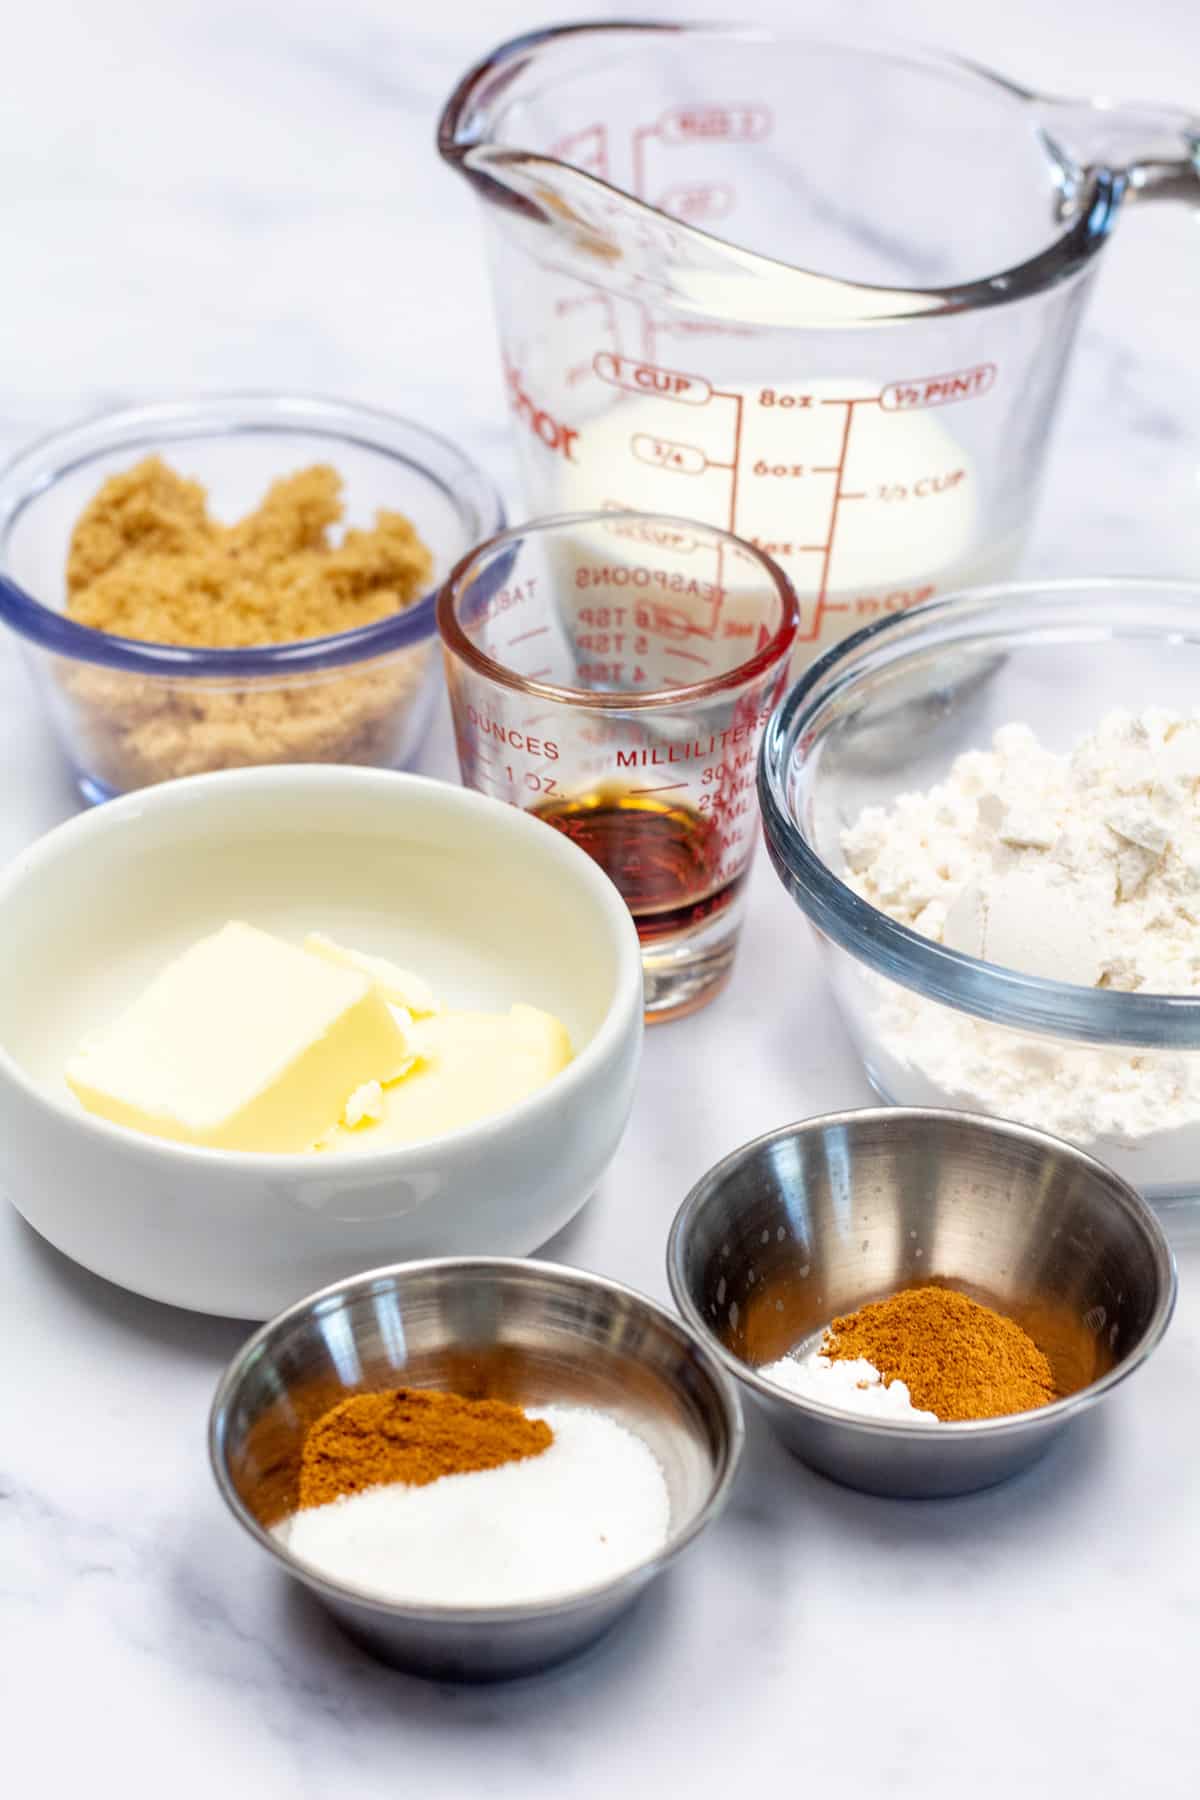 Photo showing ingredients needed for snickerdoodle mug cake.